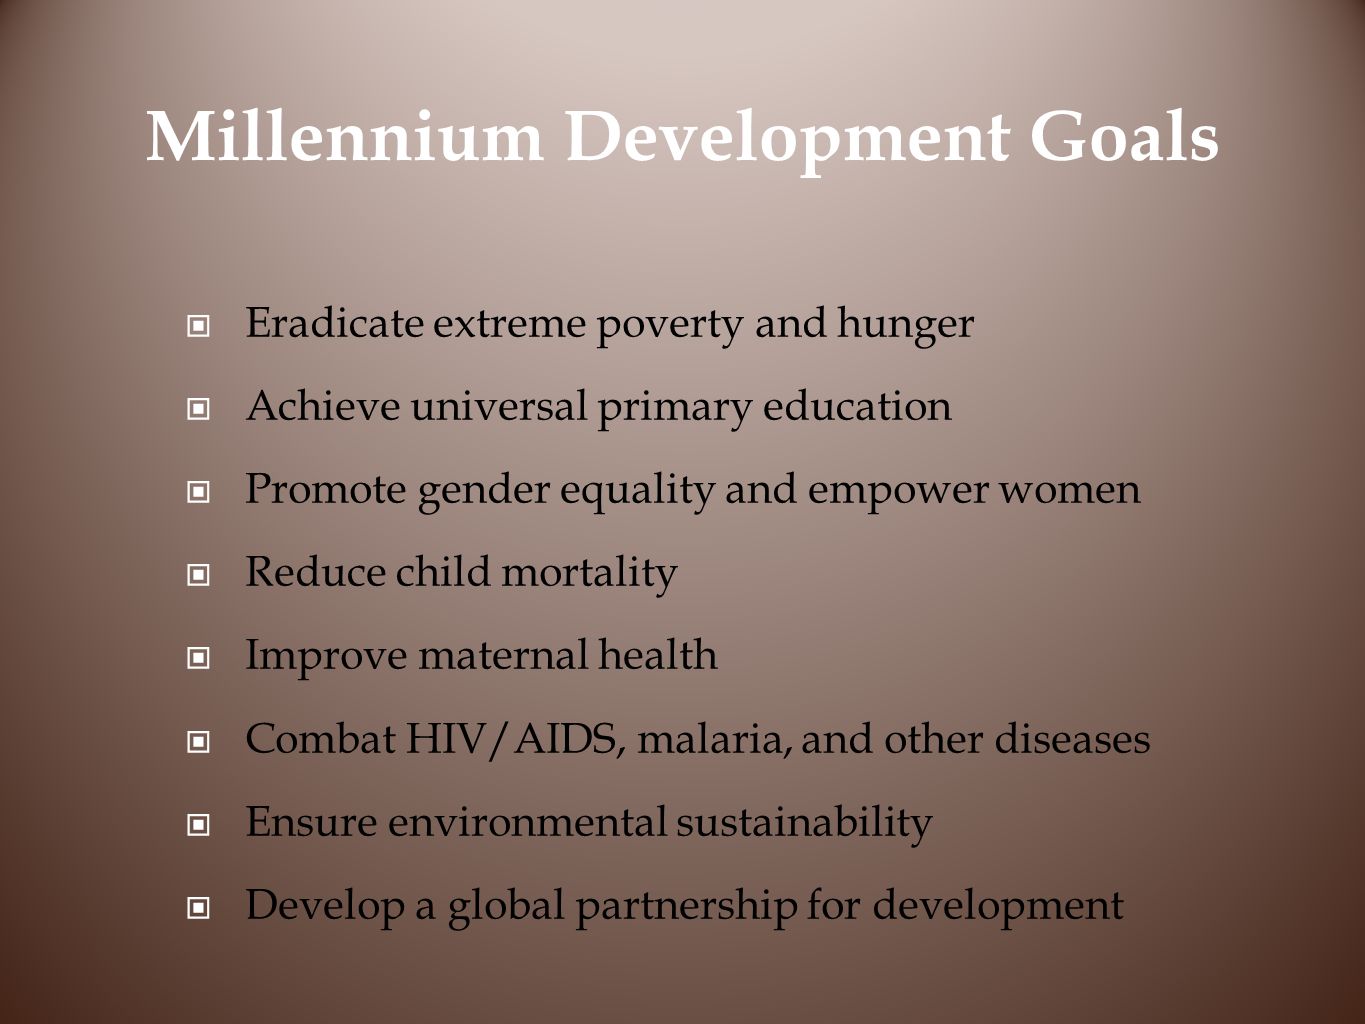 Millennium Development Goals Eradicate extreme poverty and hunger Achieve universal primary education Promote gender equality and empower women Reduce child mortality Improve maternal health Combat HIV/AIDS, malaria, and other diseases Ensure environmental sustainability Develop a global partnership for development